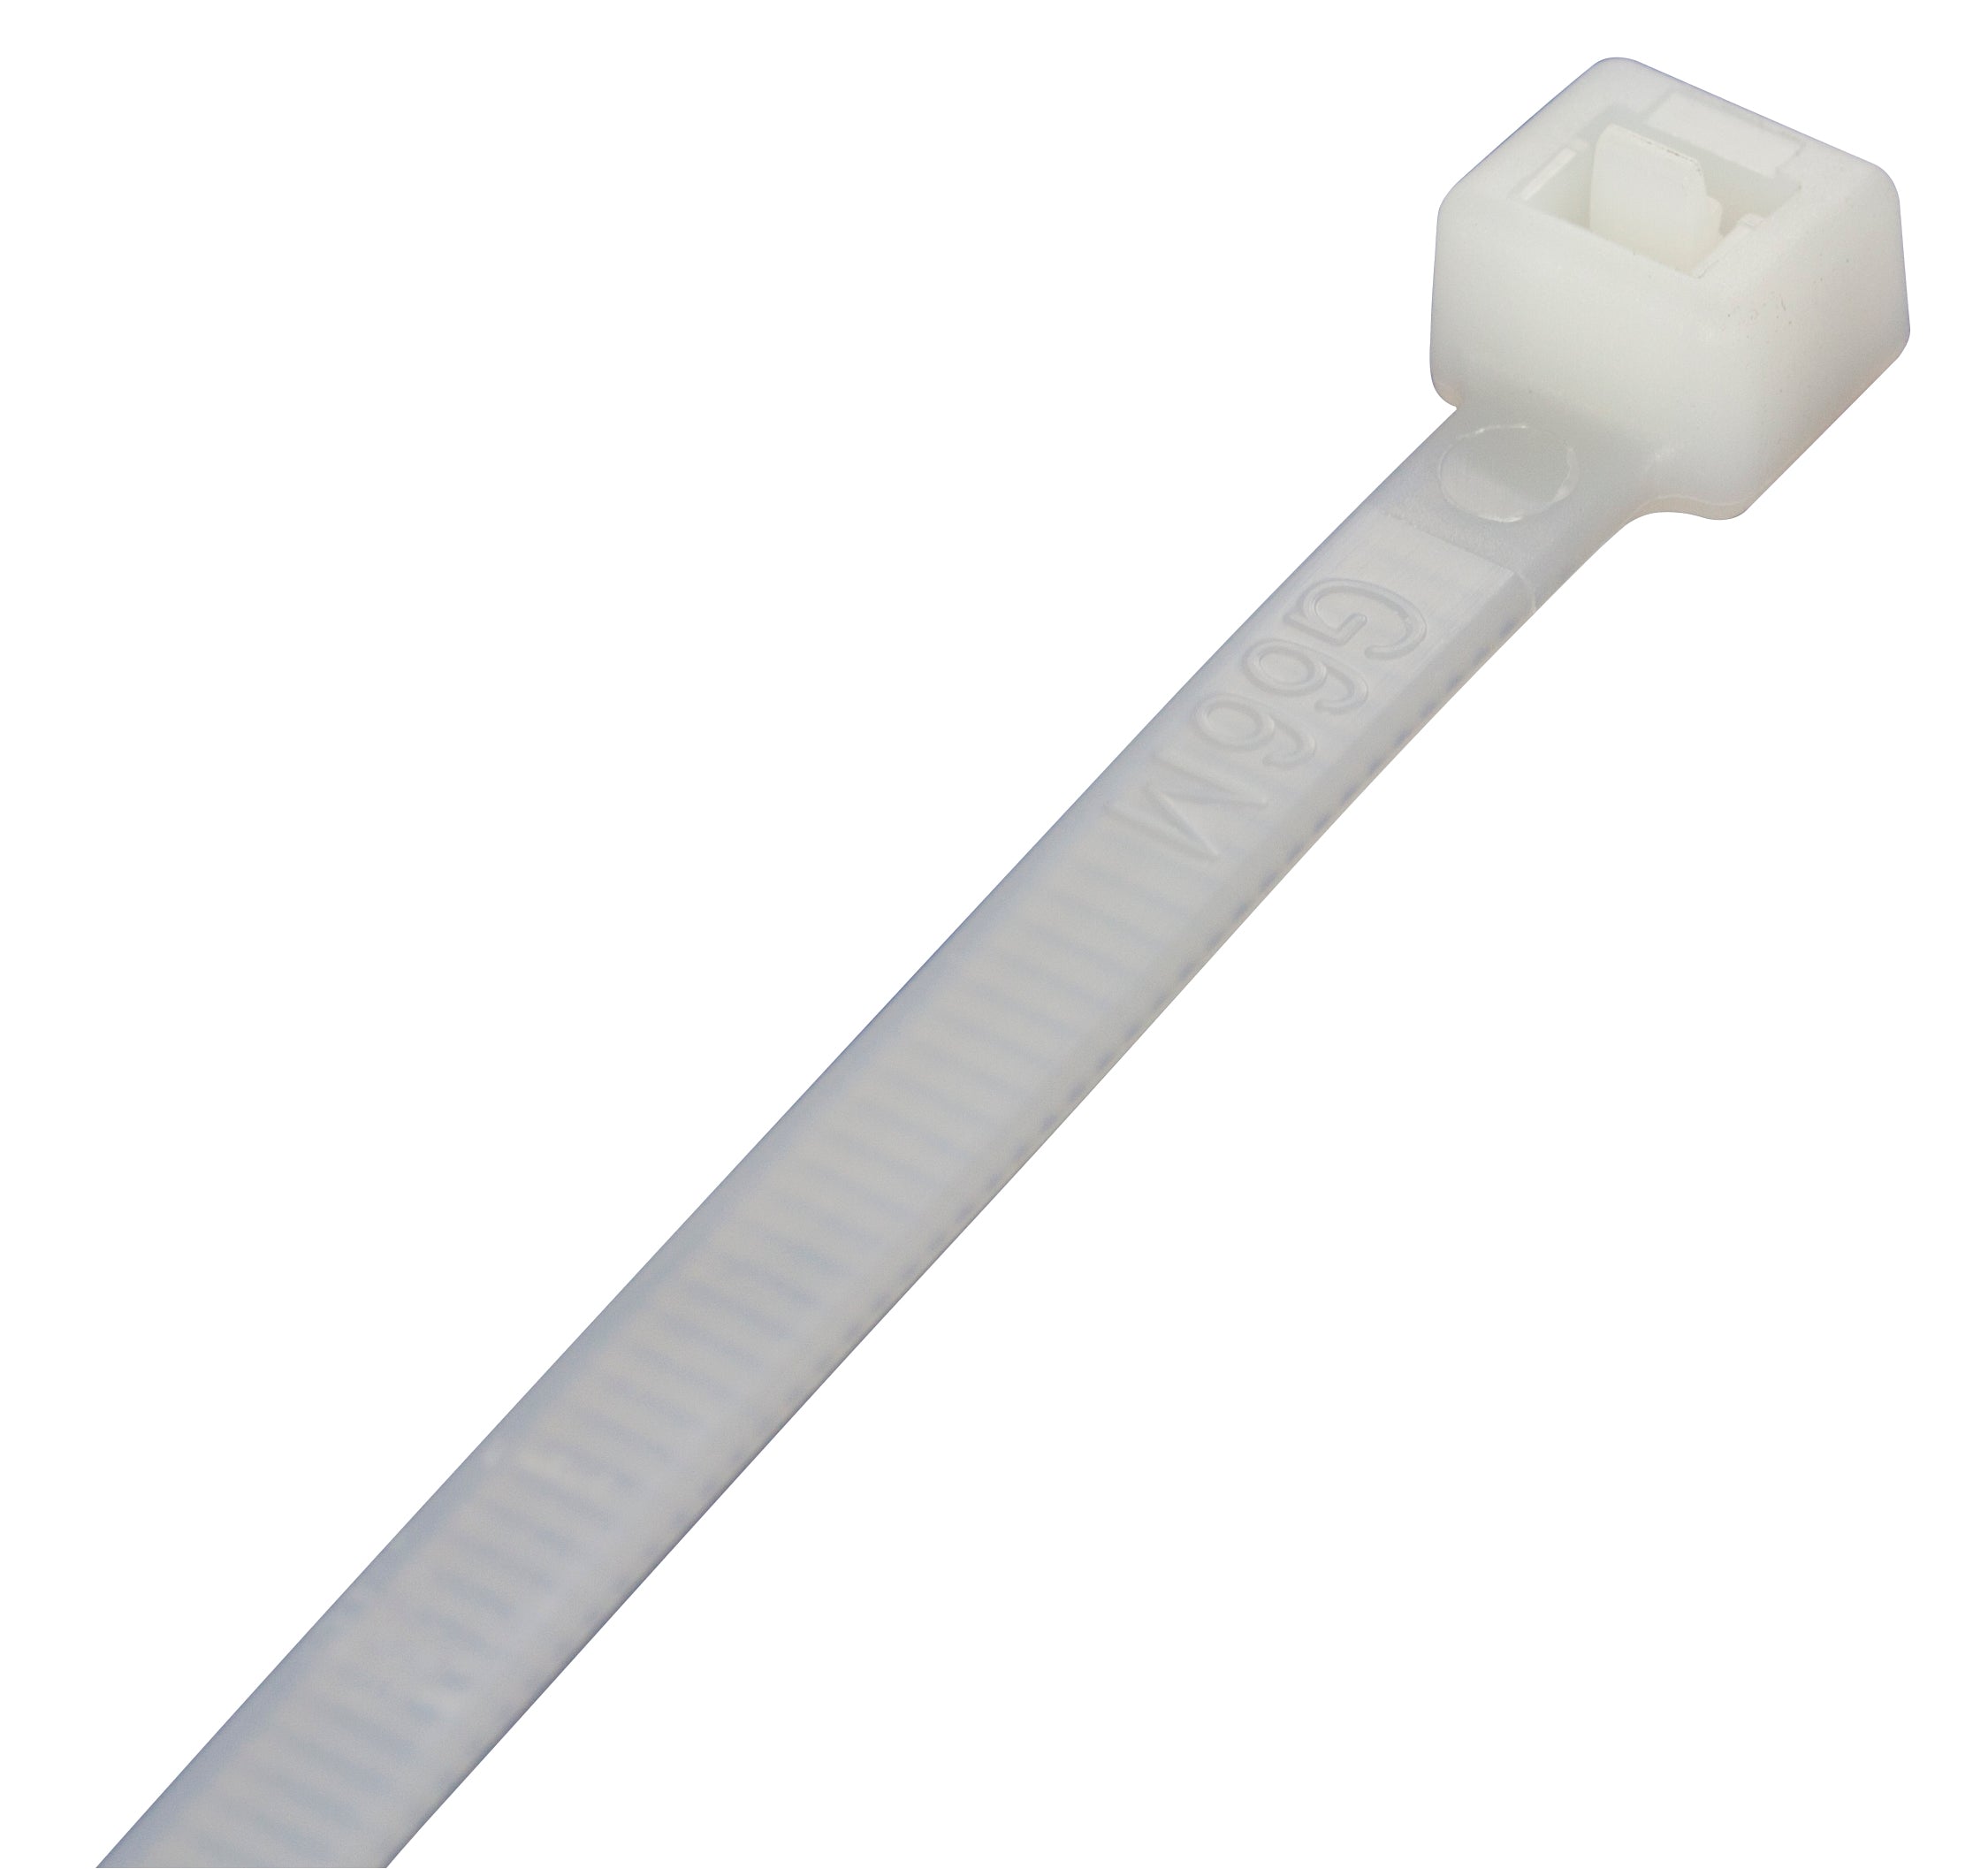 Premium Natural Cable Ties 100mm x 2.5mm - Pack of 100